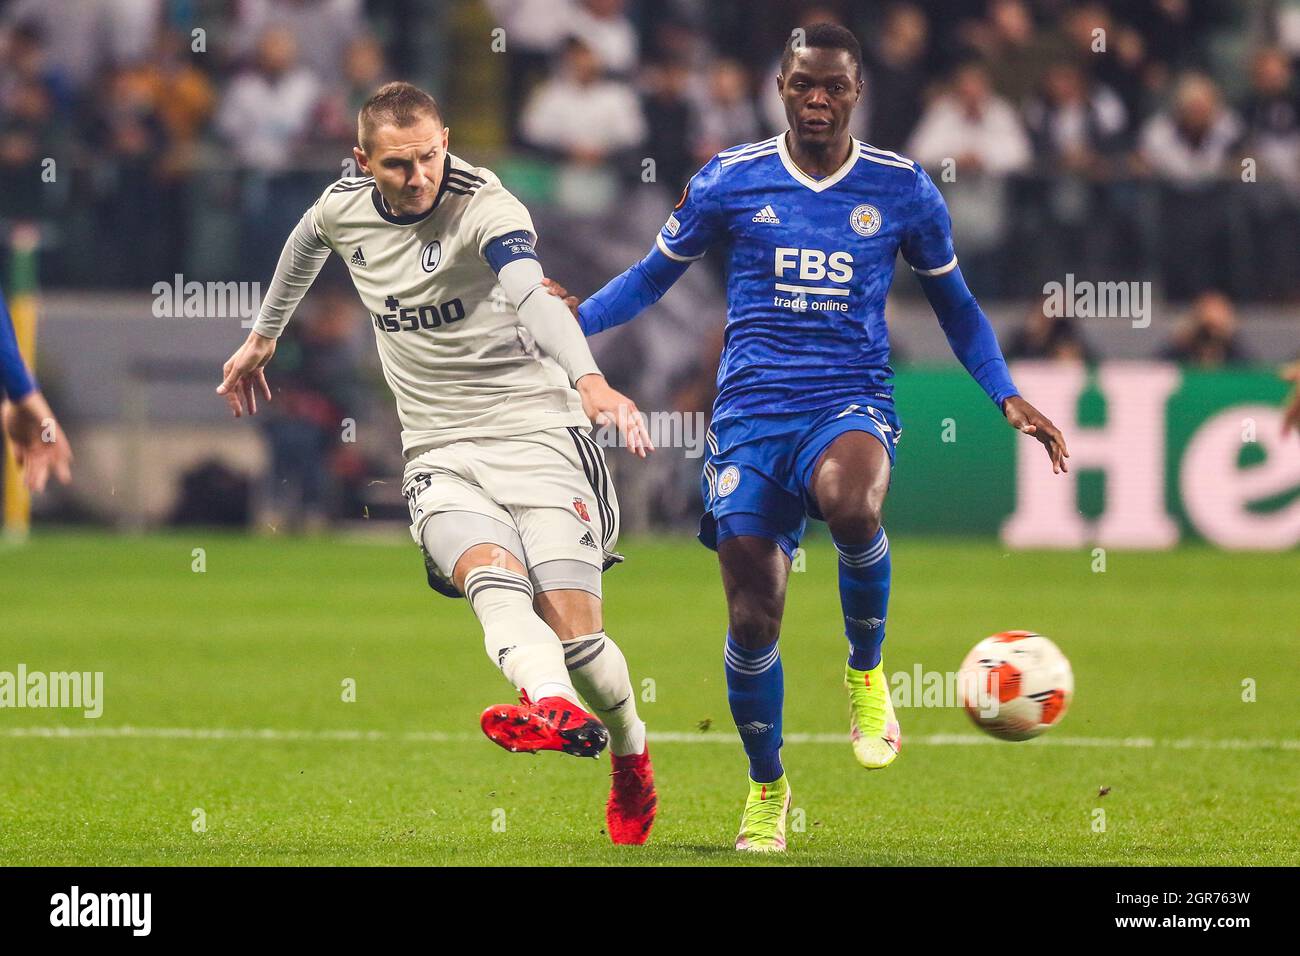 Warsaw, Poland. 30th Sep, 2021. Artur Jedrzejczyk (L) of Legia vies with Patson Daka of Leicester during the Europa League Group C football match between Legia Warsaw and Leicester City in Warsaw, Poland, Sept. 30, 2021. Credit: Adam Starszynski/Xinhua/Alamy Live News Stock Photo